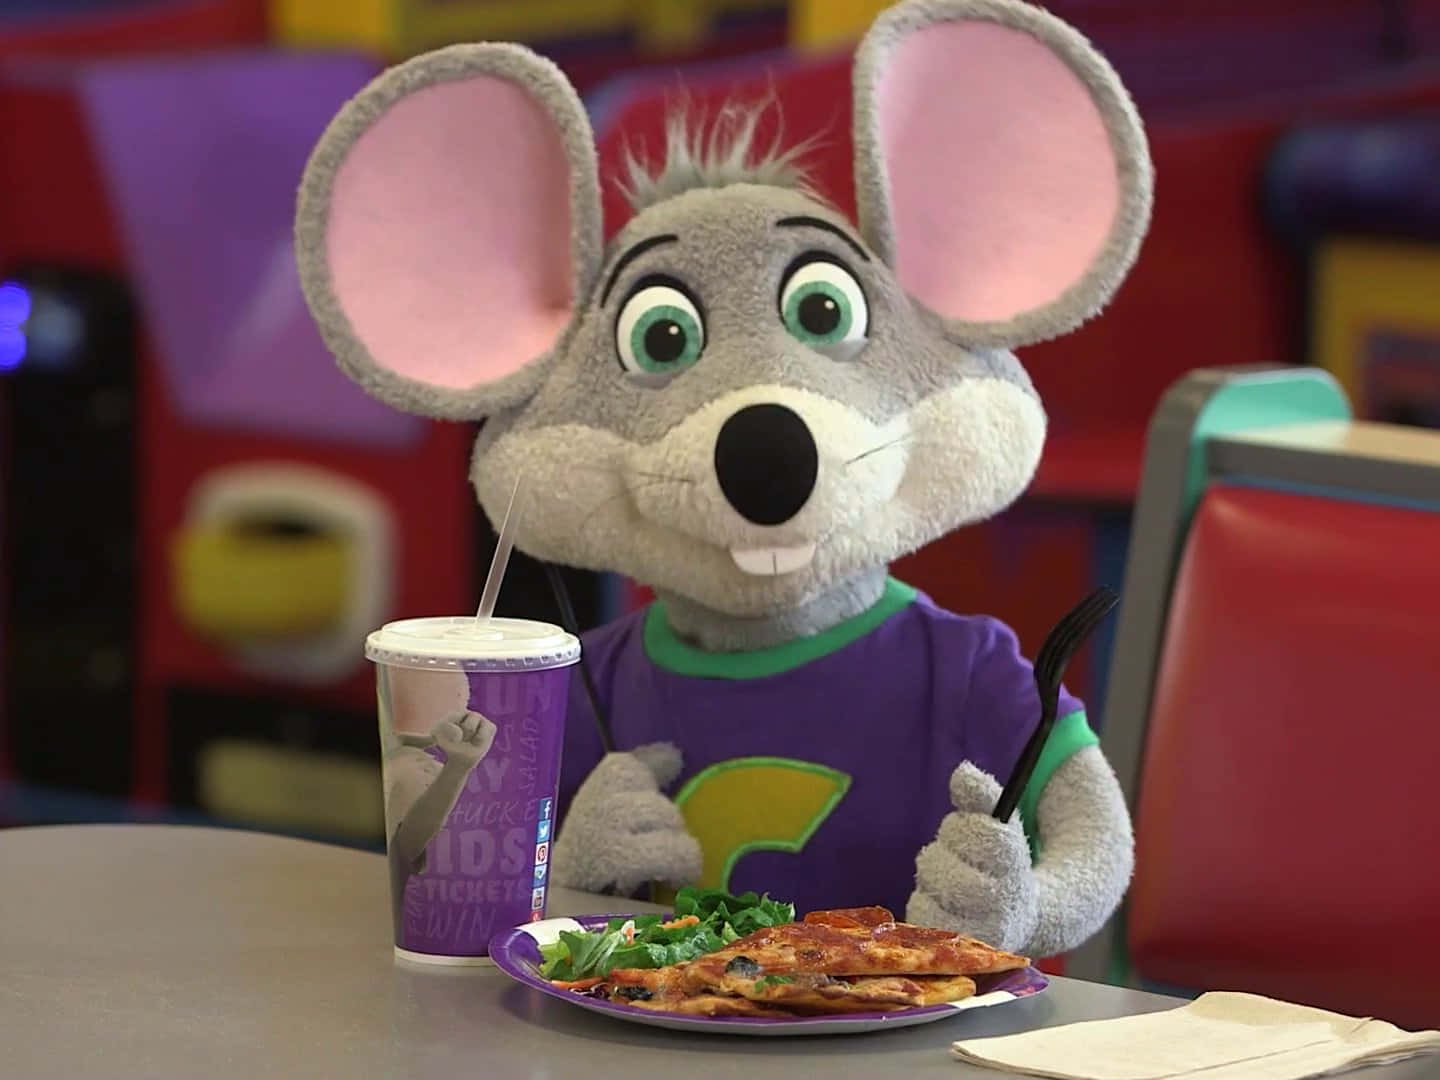 Let loose and have fun at Chuck E Cheese!